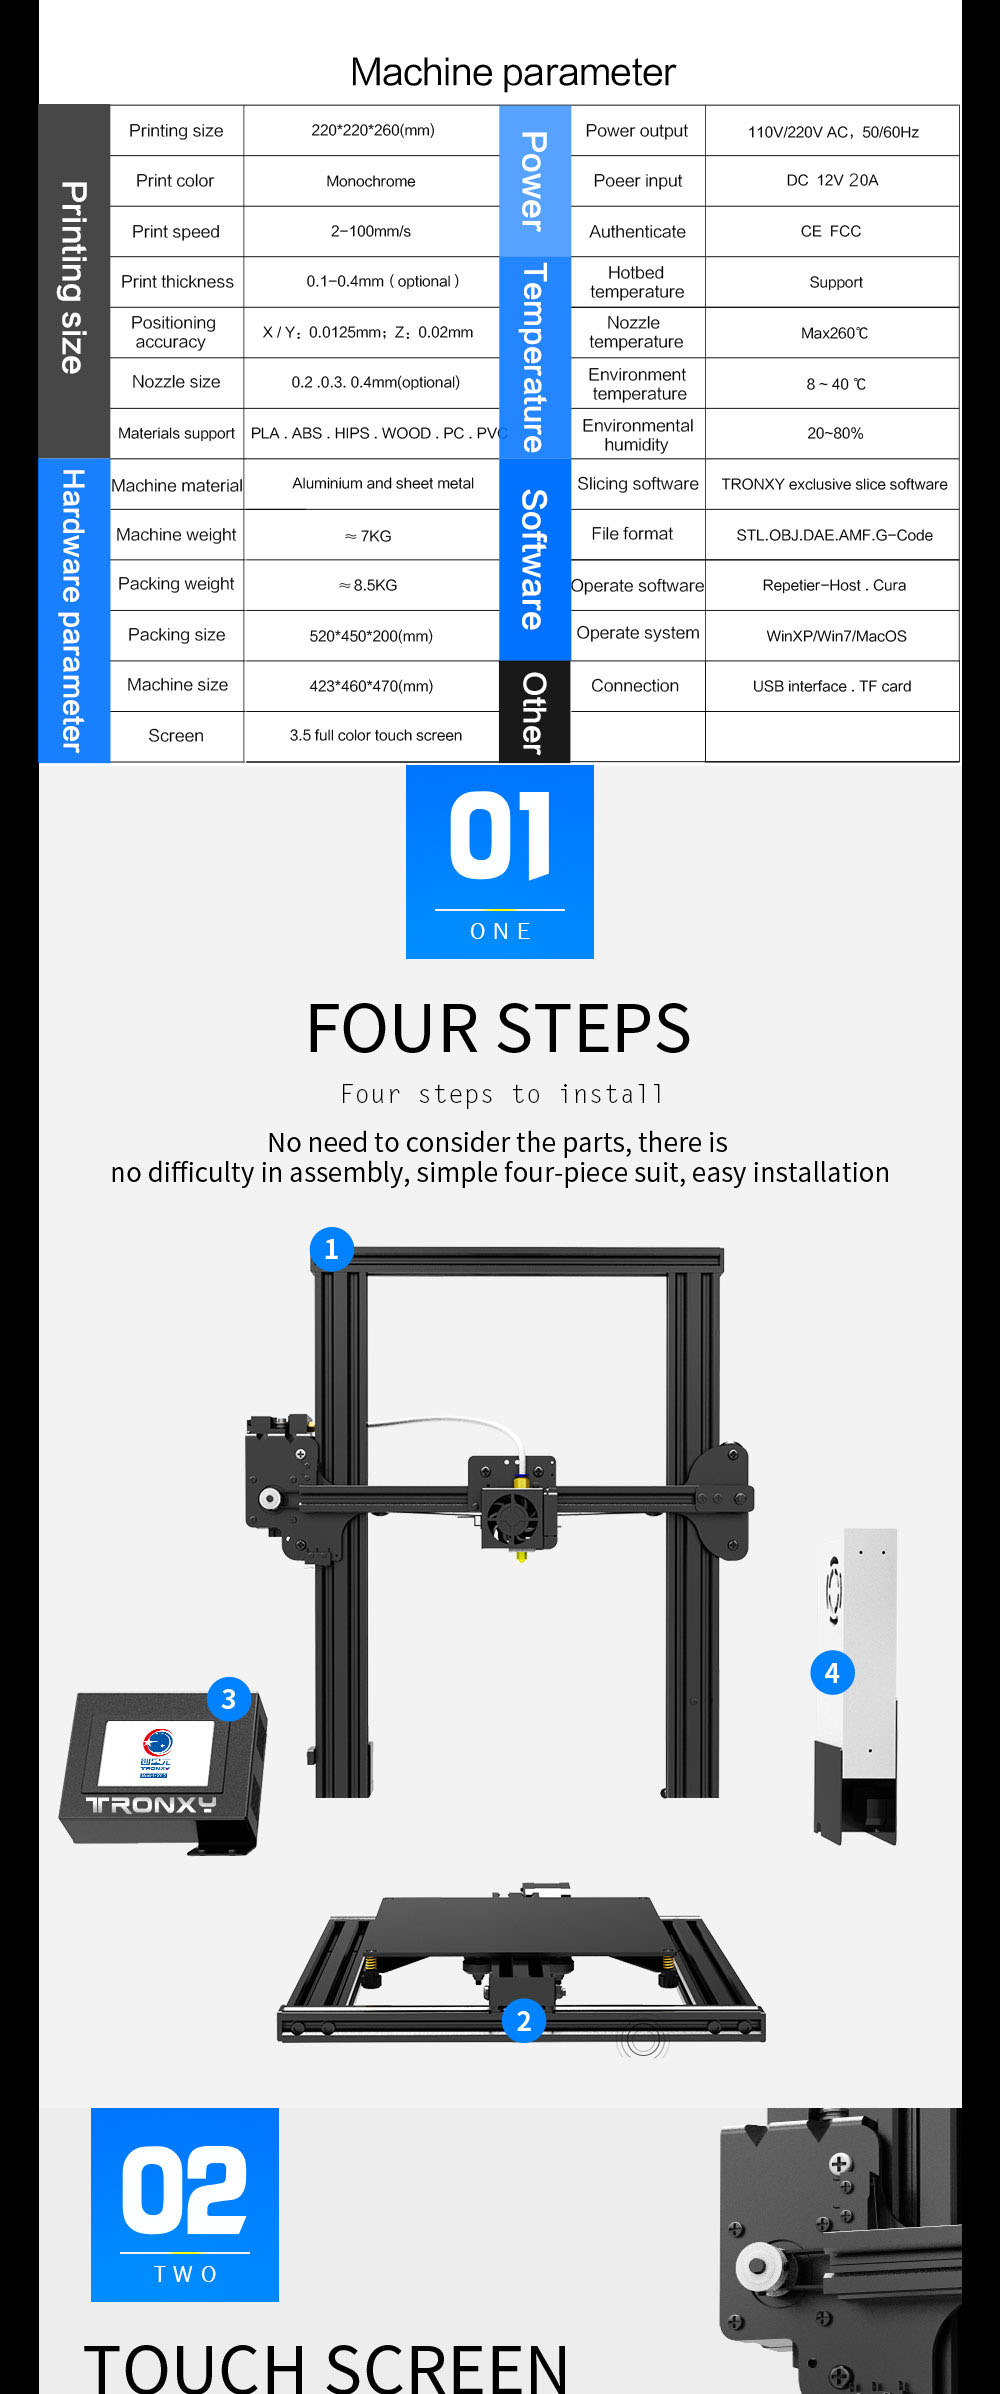 TRONXY® XY-2 Aluminum 3D Printer 220x220x260mm Printing Size With 3.5 Full Color Touch Screen/Fast Printing Speed/Bowden Extruder/Double Fans/Safety D 23